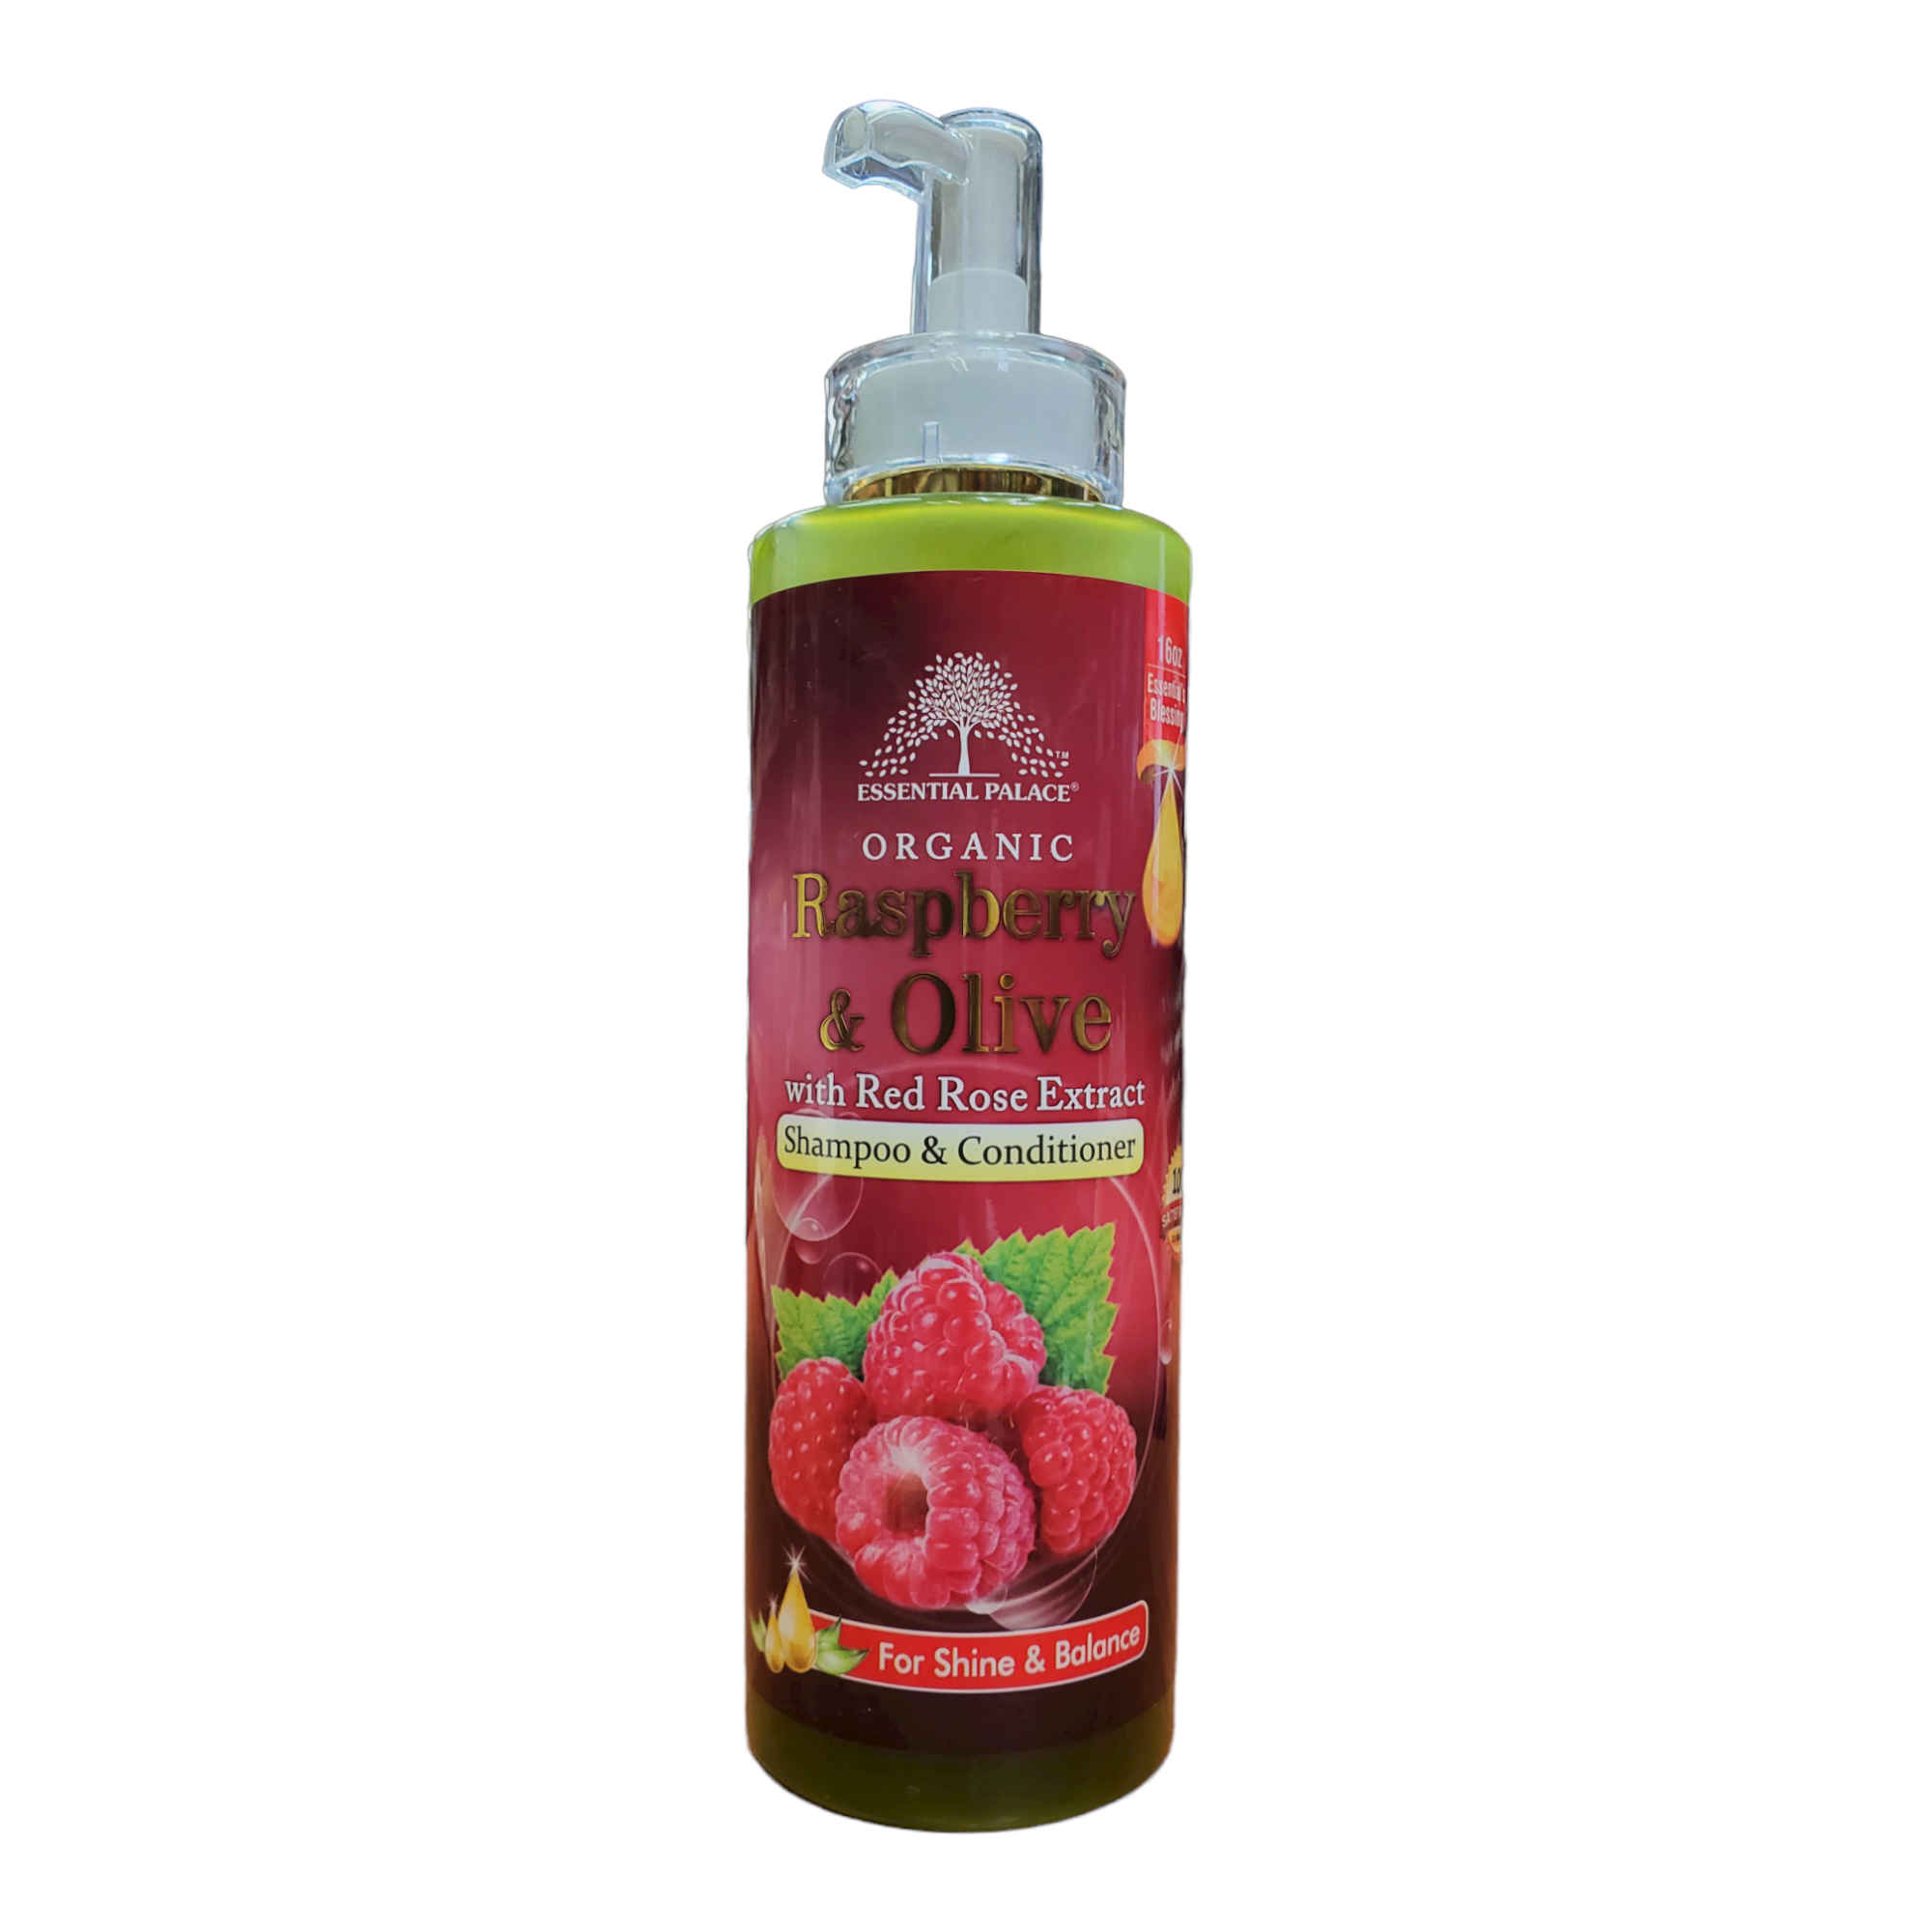 Essential Palace Raspberry Olive Shampoo and Conditioner 16 OZ Front